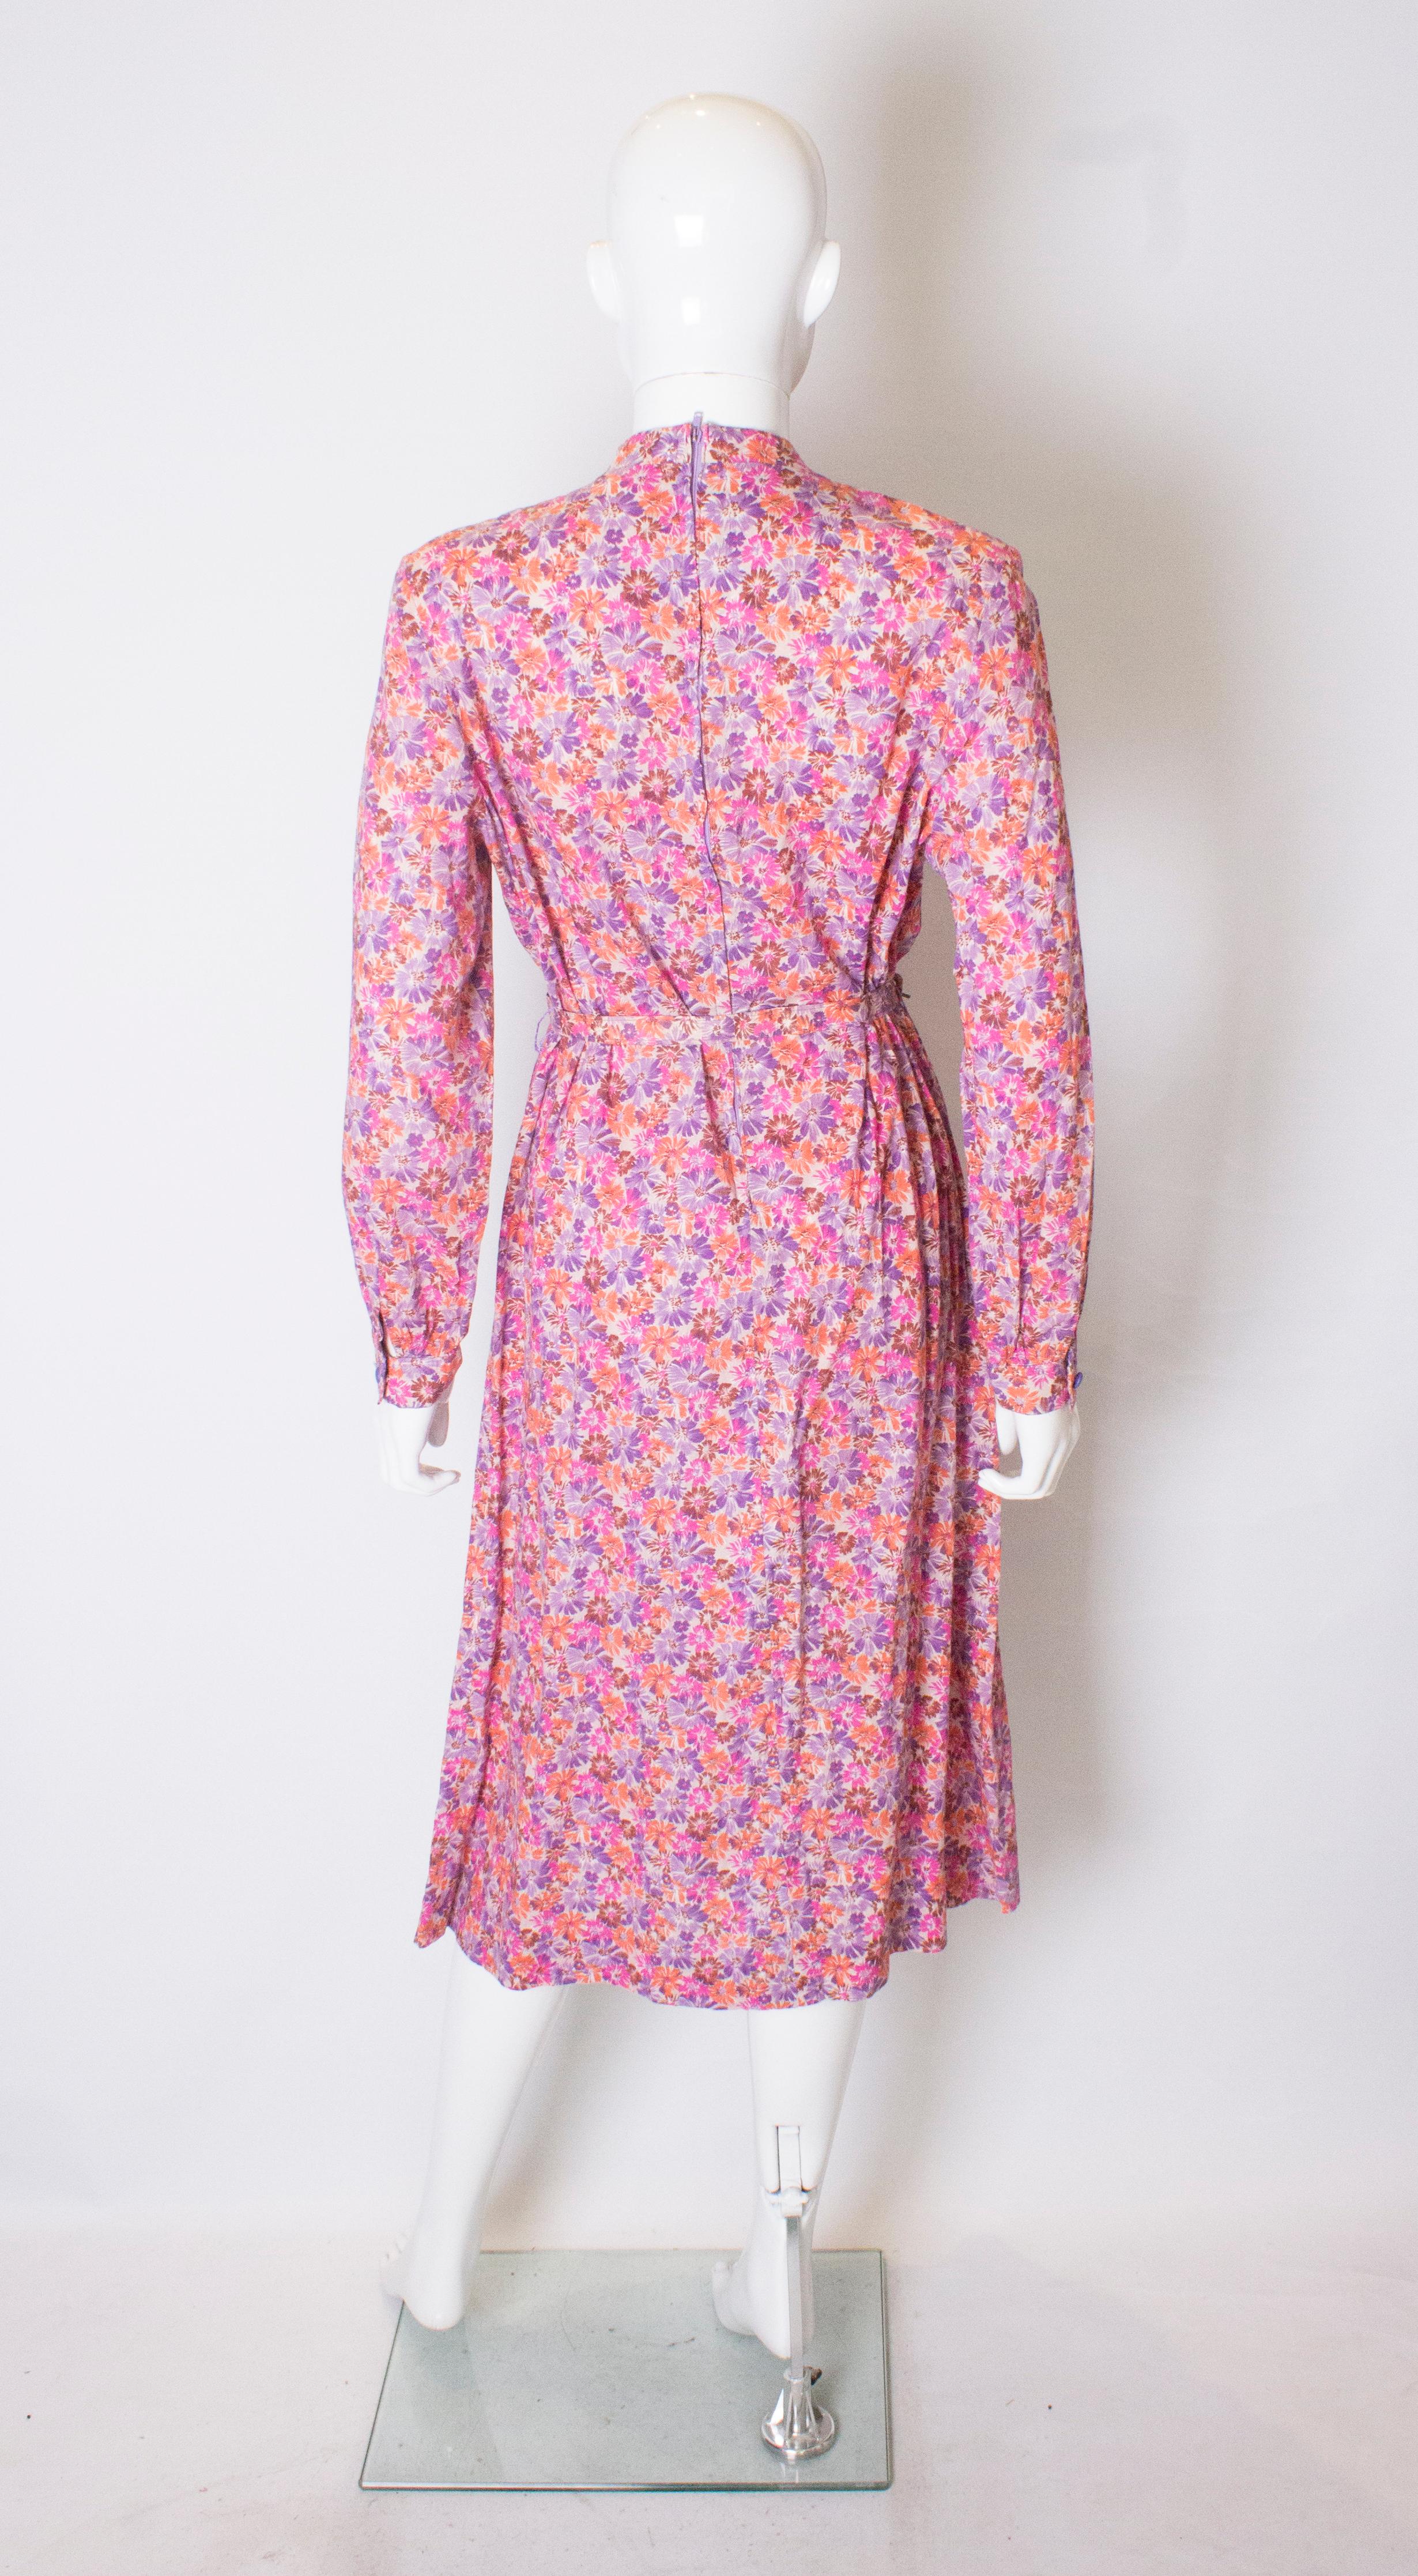 Vintage Horrocks Print Dress In Good Condition For Sale In London, GB